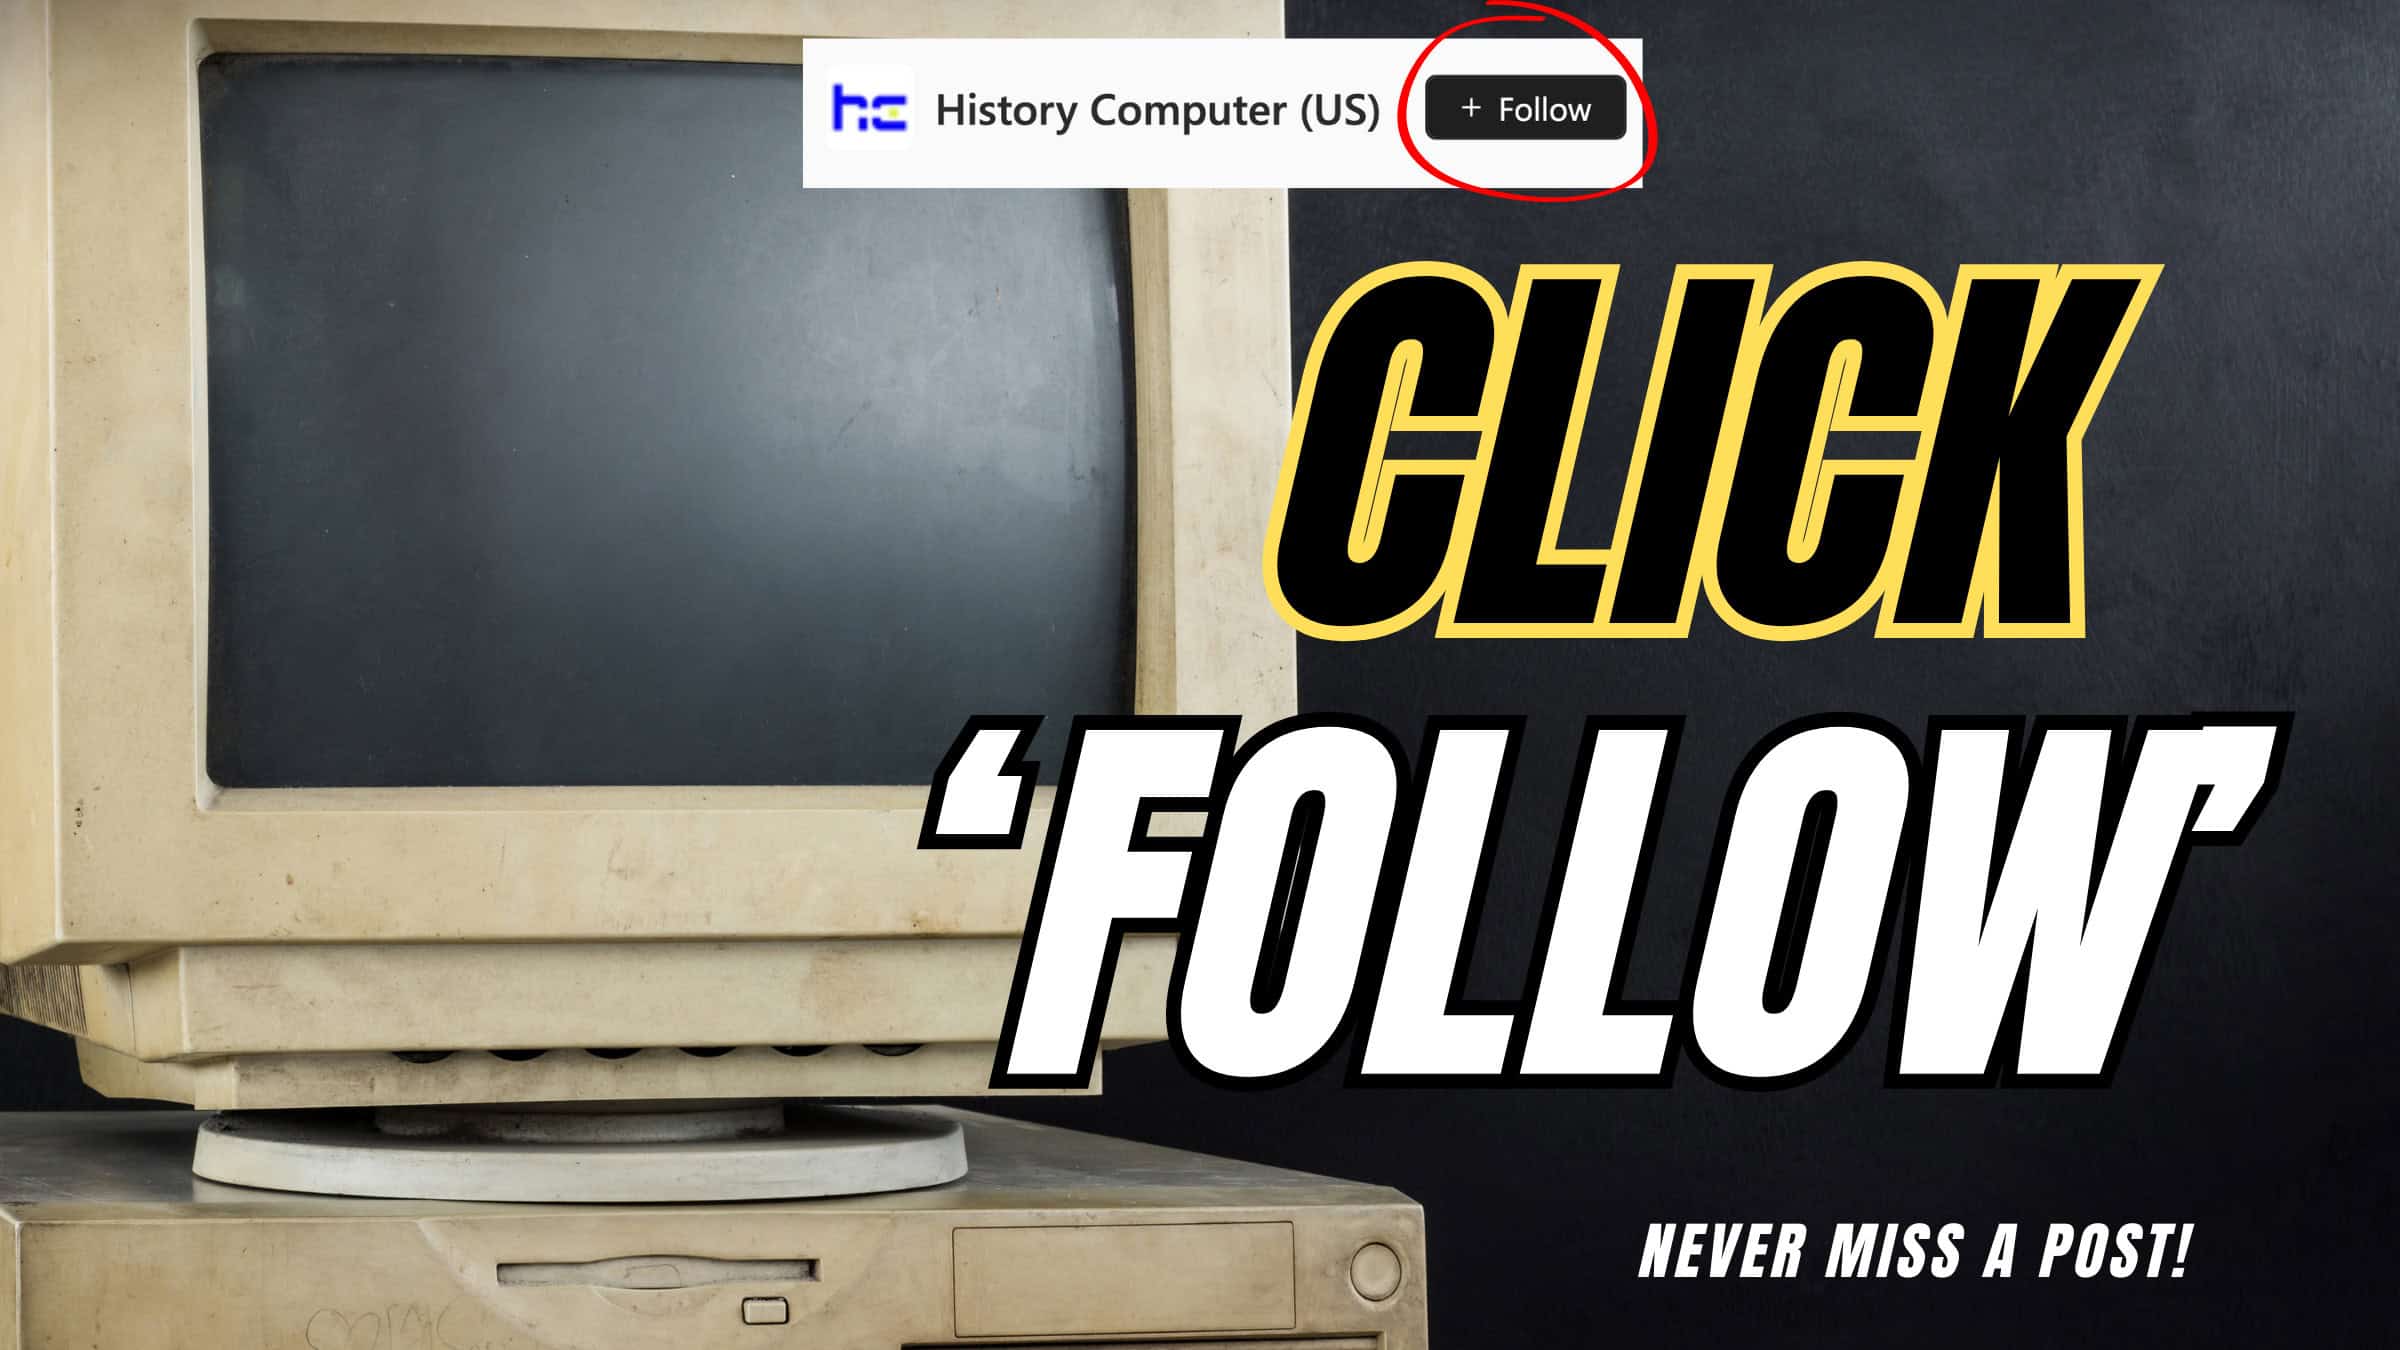 <p>Remember to scroll up and hit the ‘Follow’ button to keep up with the newest stories from History Computer on your Microsoft Start feed or MSN homepage!</p>     <h3>Up Next:</h3>     <ul>         <li><a href="https://history-computer.com?p=533223&utm_campaign=msn&utm_source=msn_slideshow&utm_content=556276&utm_medium=more_from">8 Lesser-Known Battles That Shaped Warfare Forever</a></li>         <li><a href="https://history-computer.com?p=538171&utm_campaign=msn&utm_source=msn_slideshow&utm_content=556276&utm_medium=more_from">The 5 Longest Sieges and Their Devastating Effects</a></li>         <li><a href="https://history-computer.com?p=533228&utm_campaign=msn&utm_source=msn_slideshow&utm_content=556276&utm_medium=more_from">12 Historical Mysteries That Continue to Baffle Experts</a></li>     </ul>